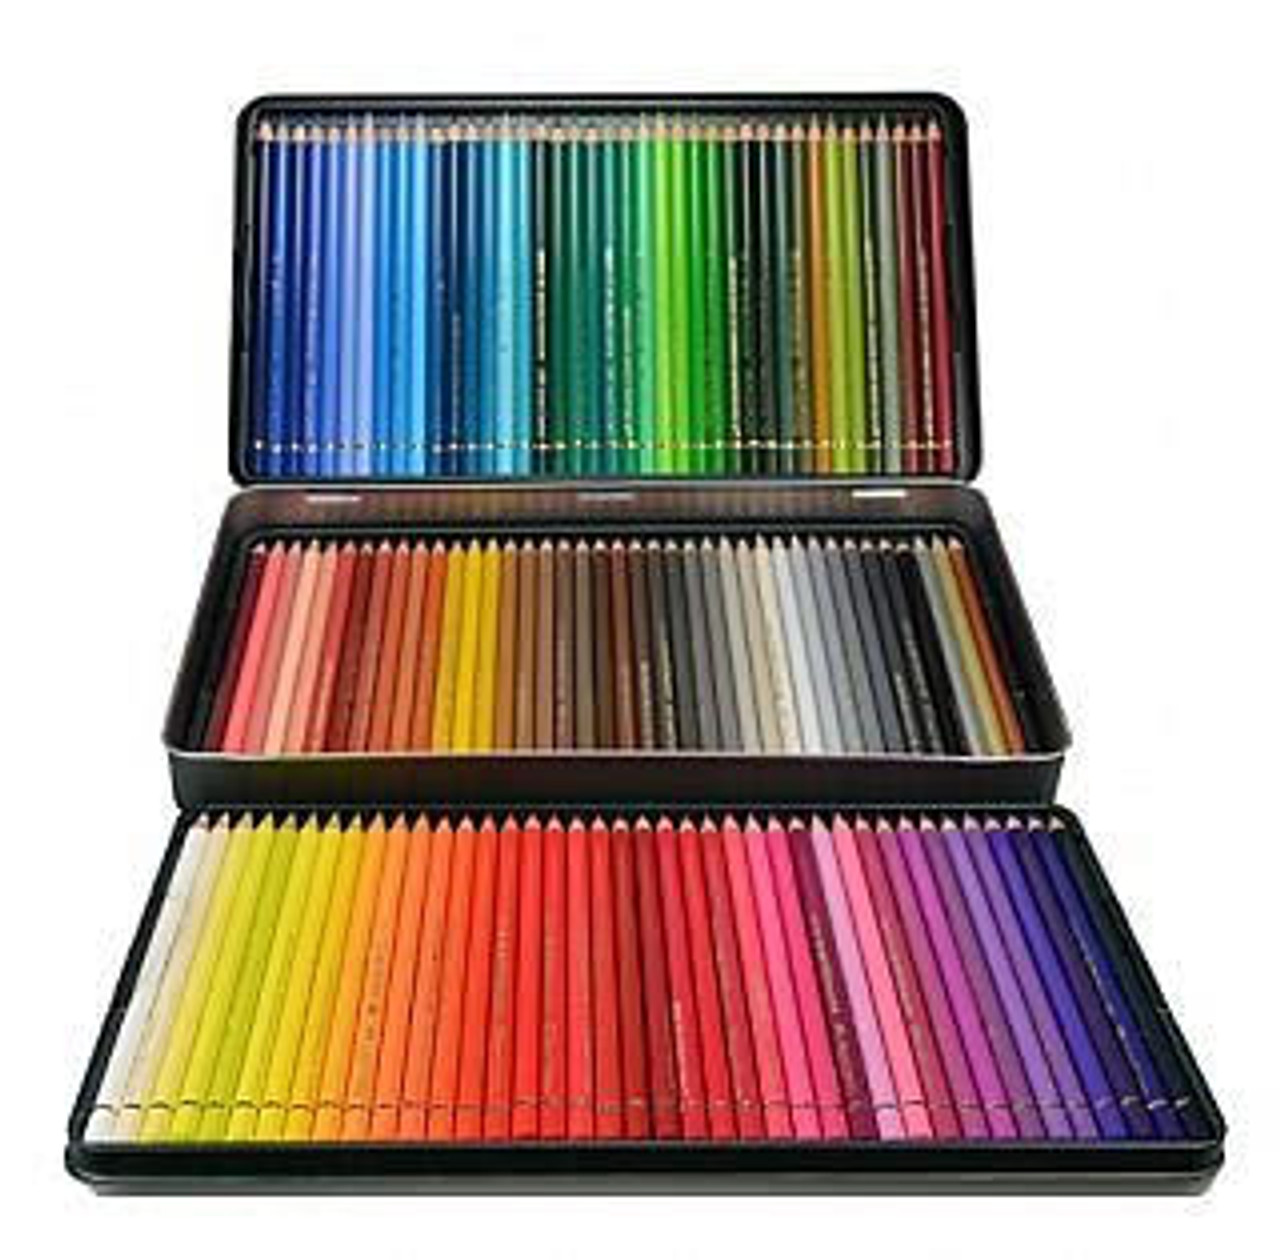 https://cdn11.bigcommerce.com/s-9uf88xhege/images/stencil/1280x1280/products/5668/77917/faber-castell-polychromos-colour-pencil-set-of-120__23207.1680307365.jpg?c=1?imbypass=on